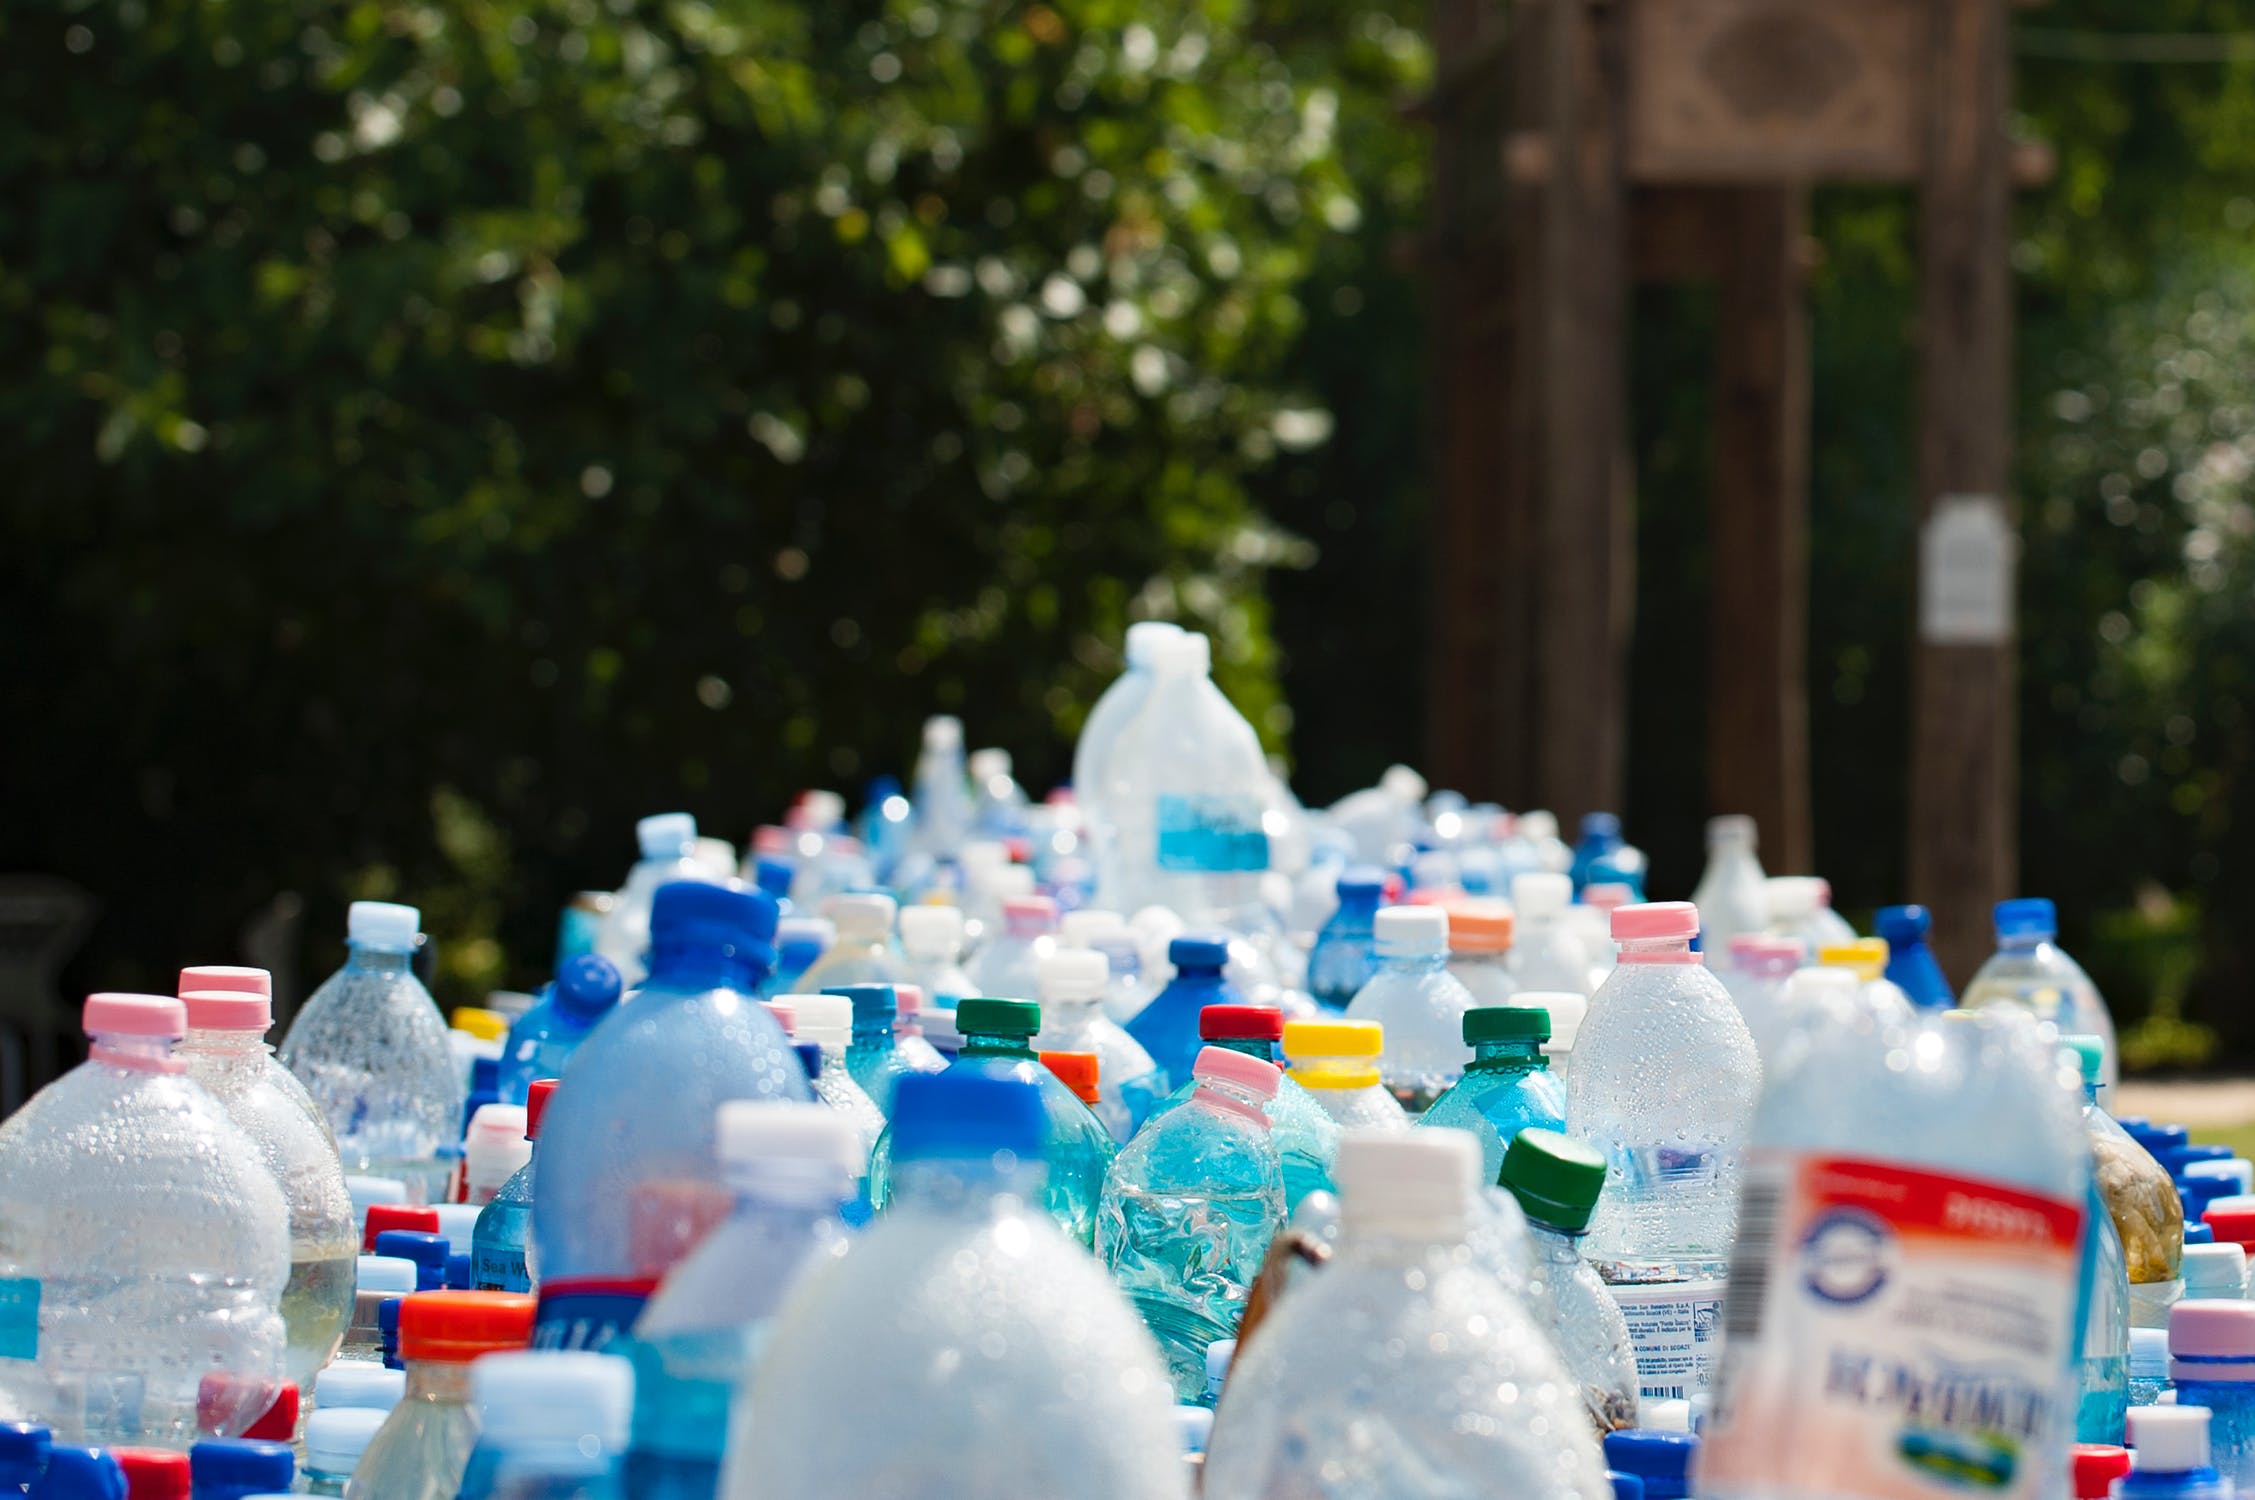 What Impact Does Recycling Have on the Environment?